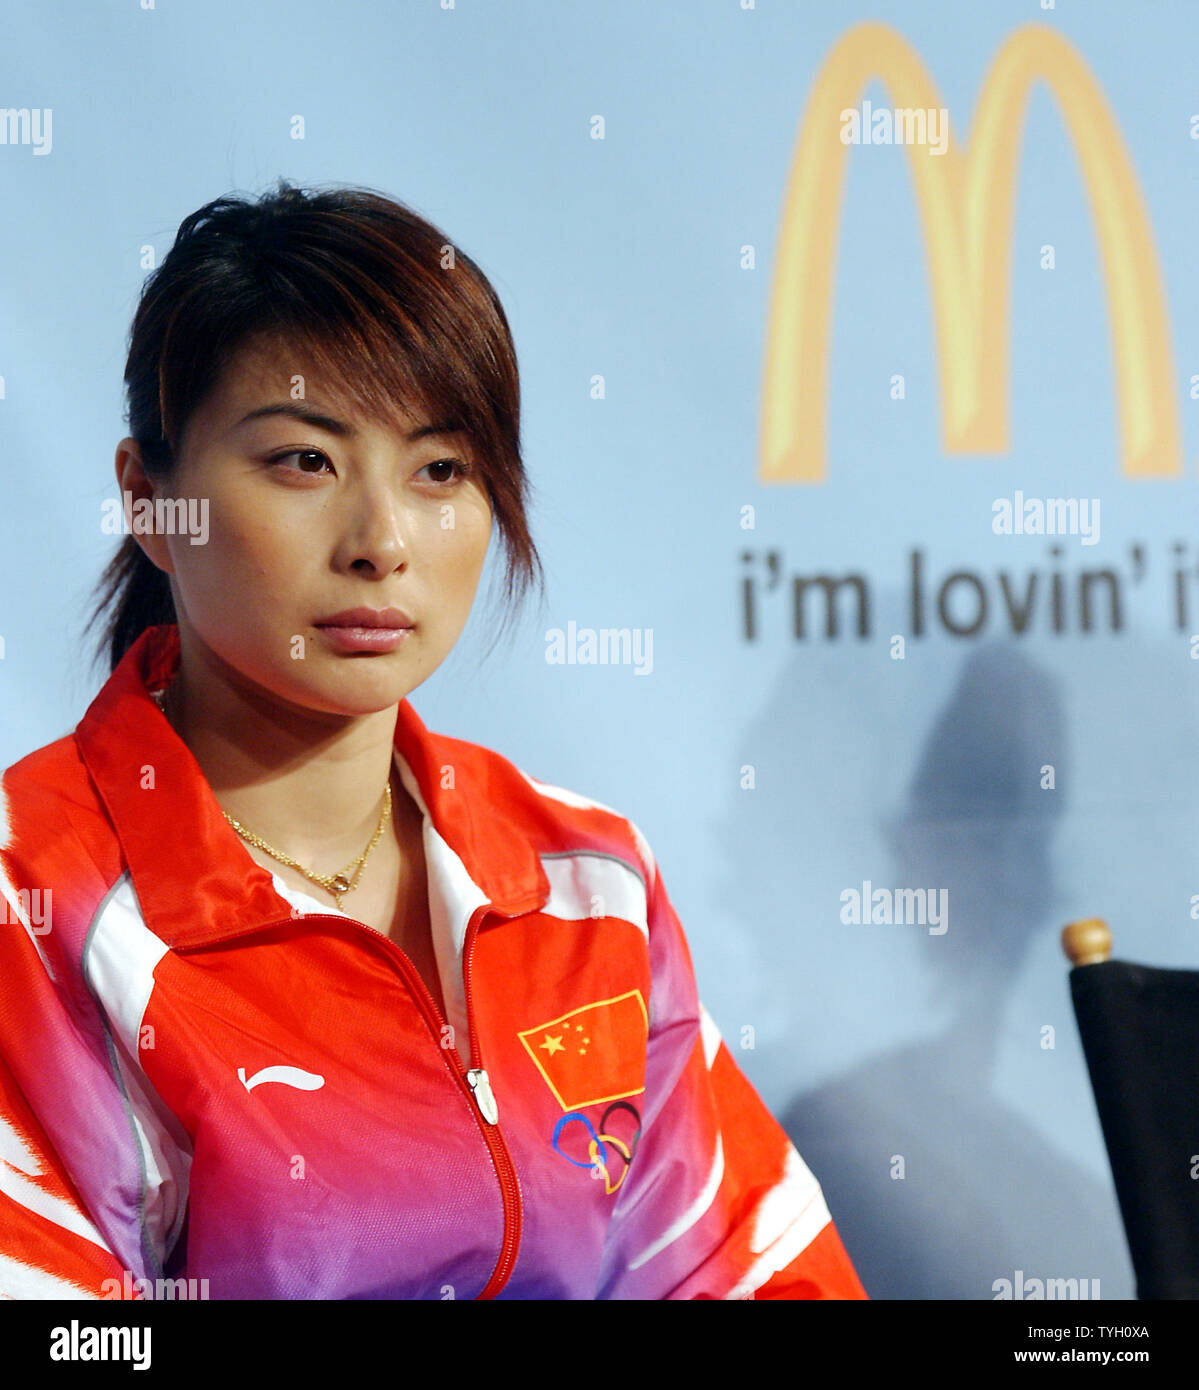 Guo Jingjing, who is on China Olympian diving team, takes part in the McDonald's New York promotional launch on March 8, 2005 of a multi faceted education campaign themed: 'it's what i eat and what i do...i'm lovin' it' to help consumers understand the important interplay between eating right and staying active.  (UPI Photo/Ezio Petersen) Stock Photo